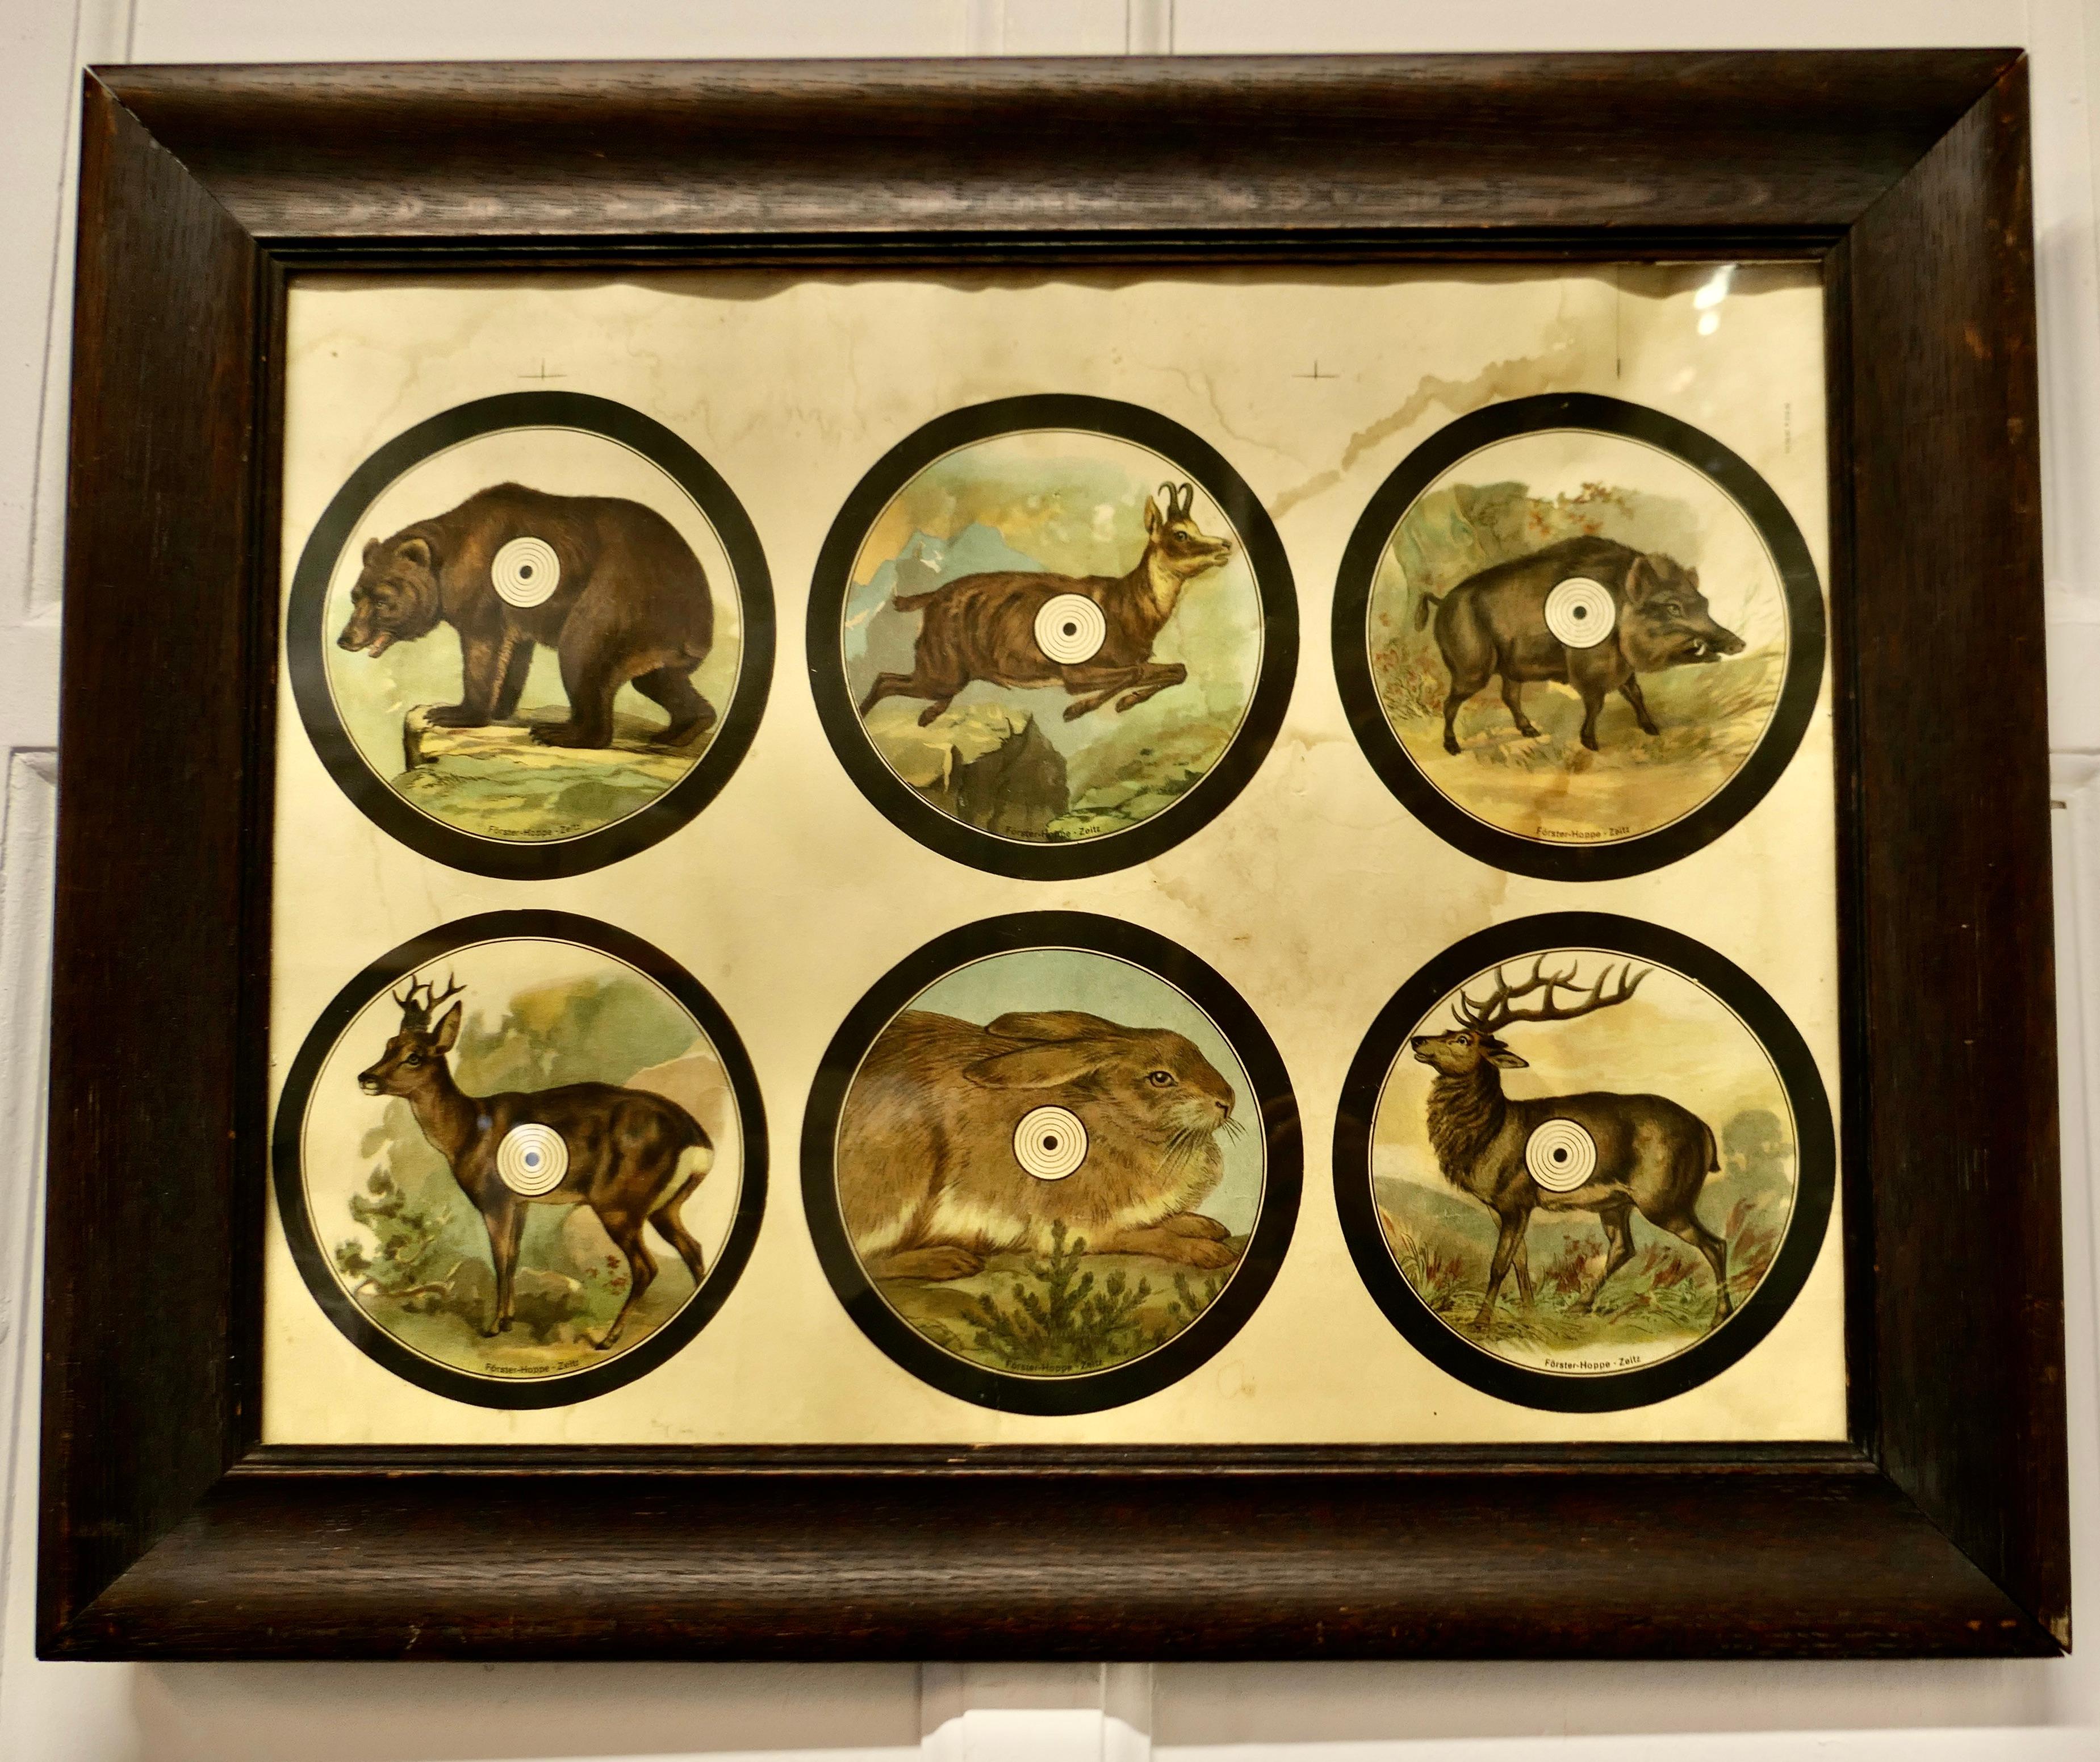 A framed set of black forest hunting/shooting targets.

This is a charming set framed in an old oak frame, they show the wild Game from the Black forest
This is a very attractive set, the set has a few watermarks on the paper but is in otherwise